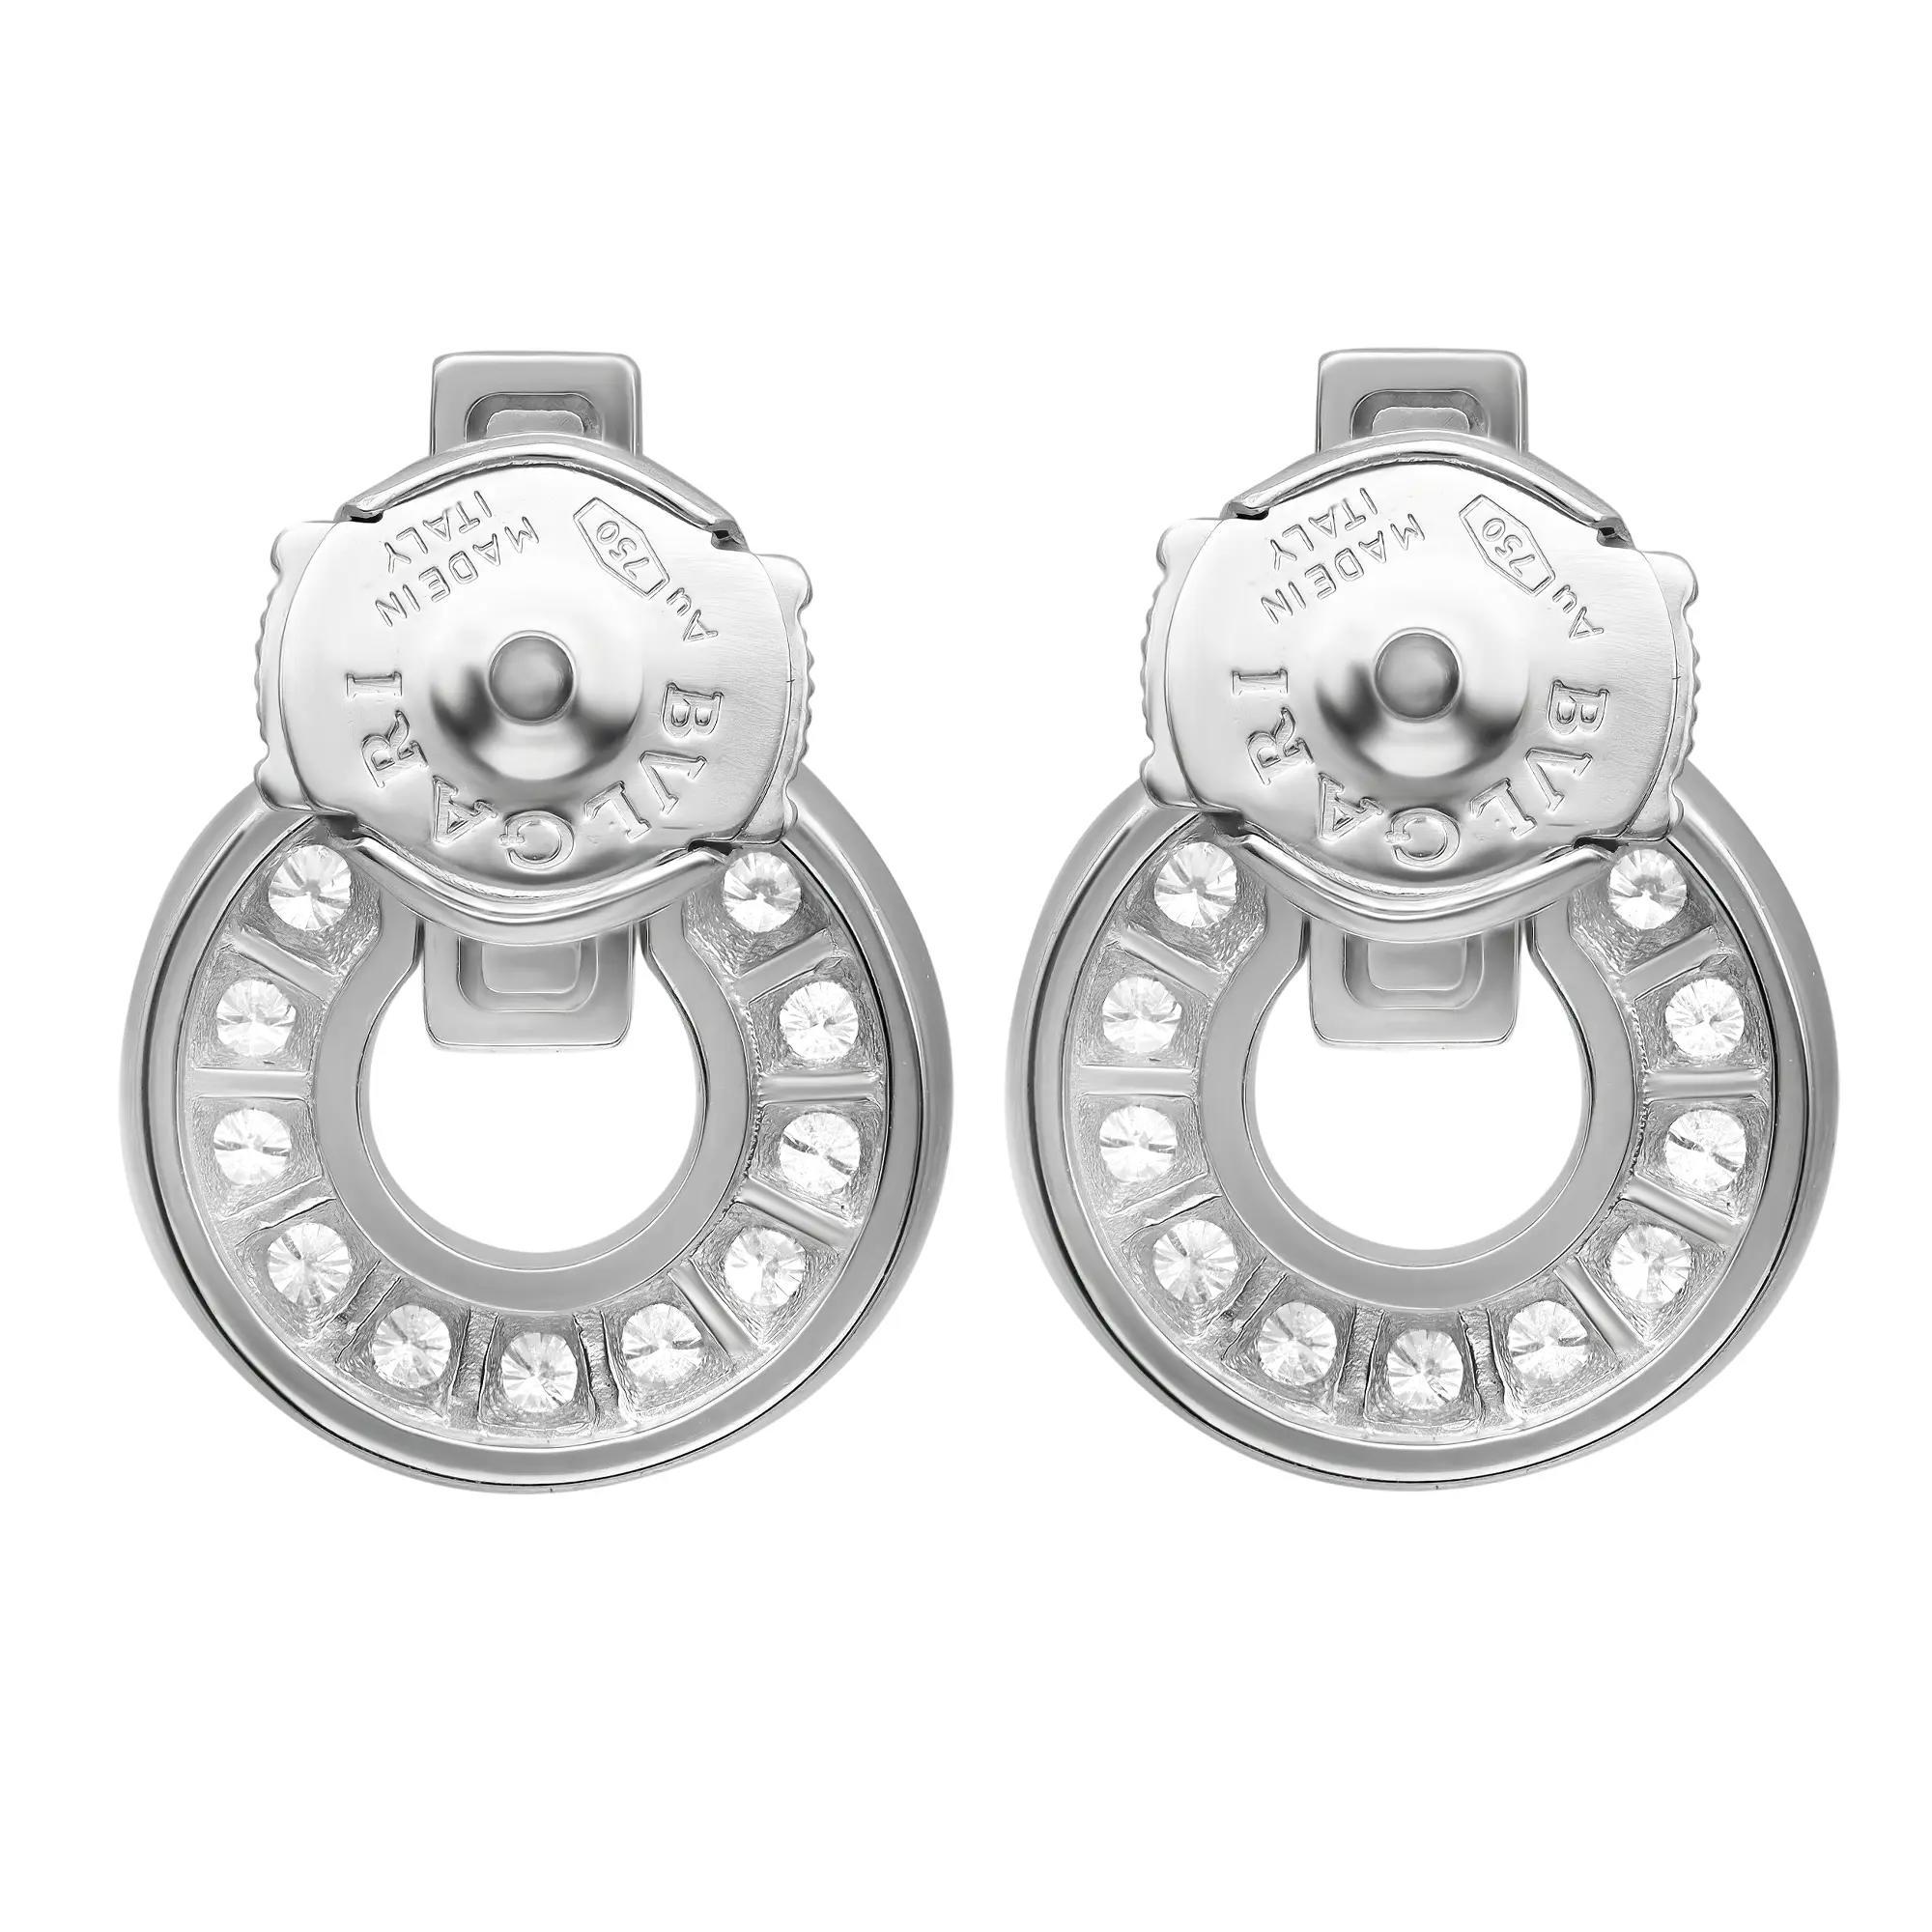 Beautiful and contemporary statement of sophistication, these Bvlgari Bvlgari diamond earrings are crafted in lustrous 18K white gold. It features a Bvlgari logo engraved earring top attached to an iconic circular motif with an openwork design